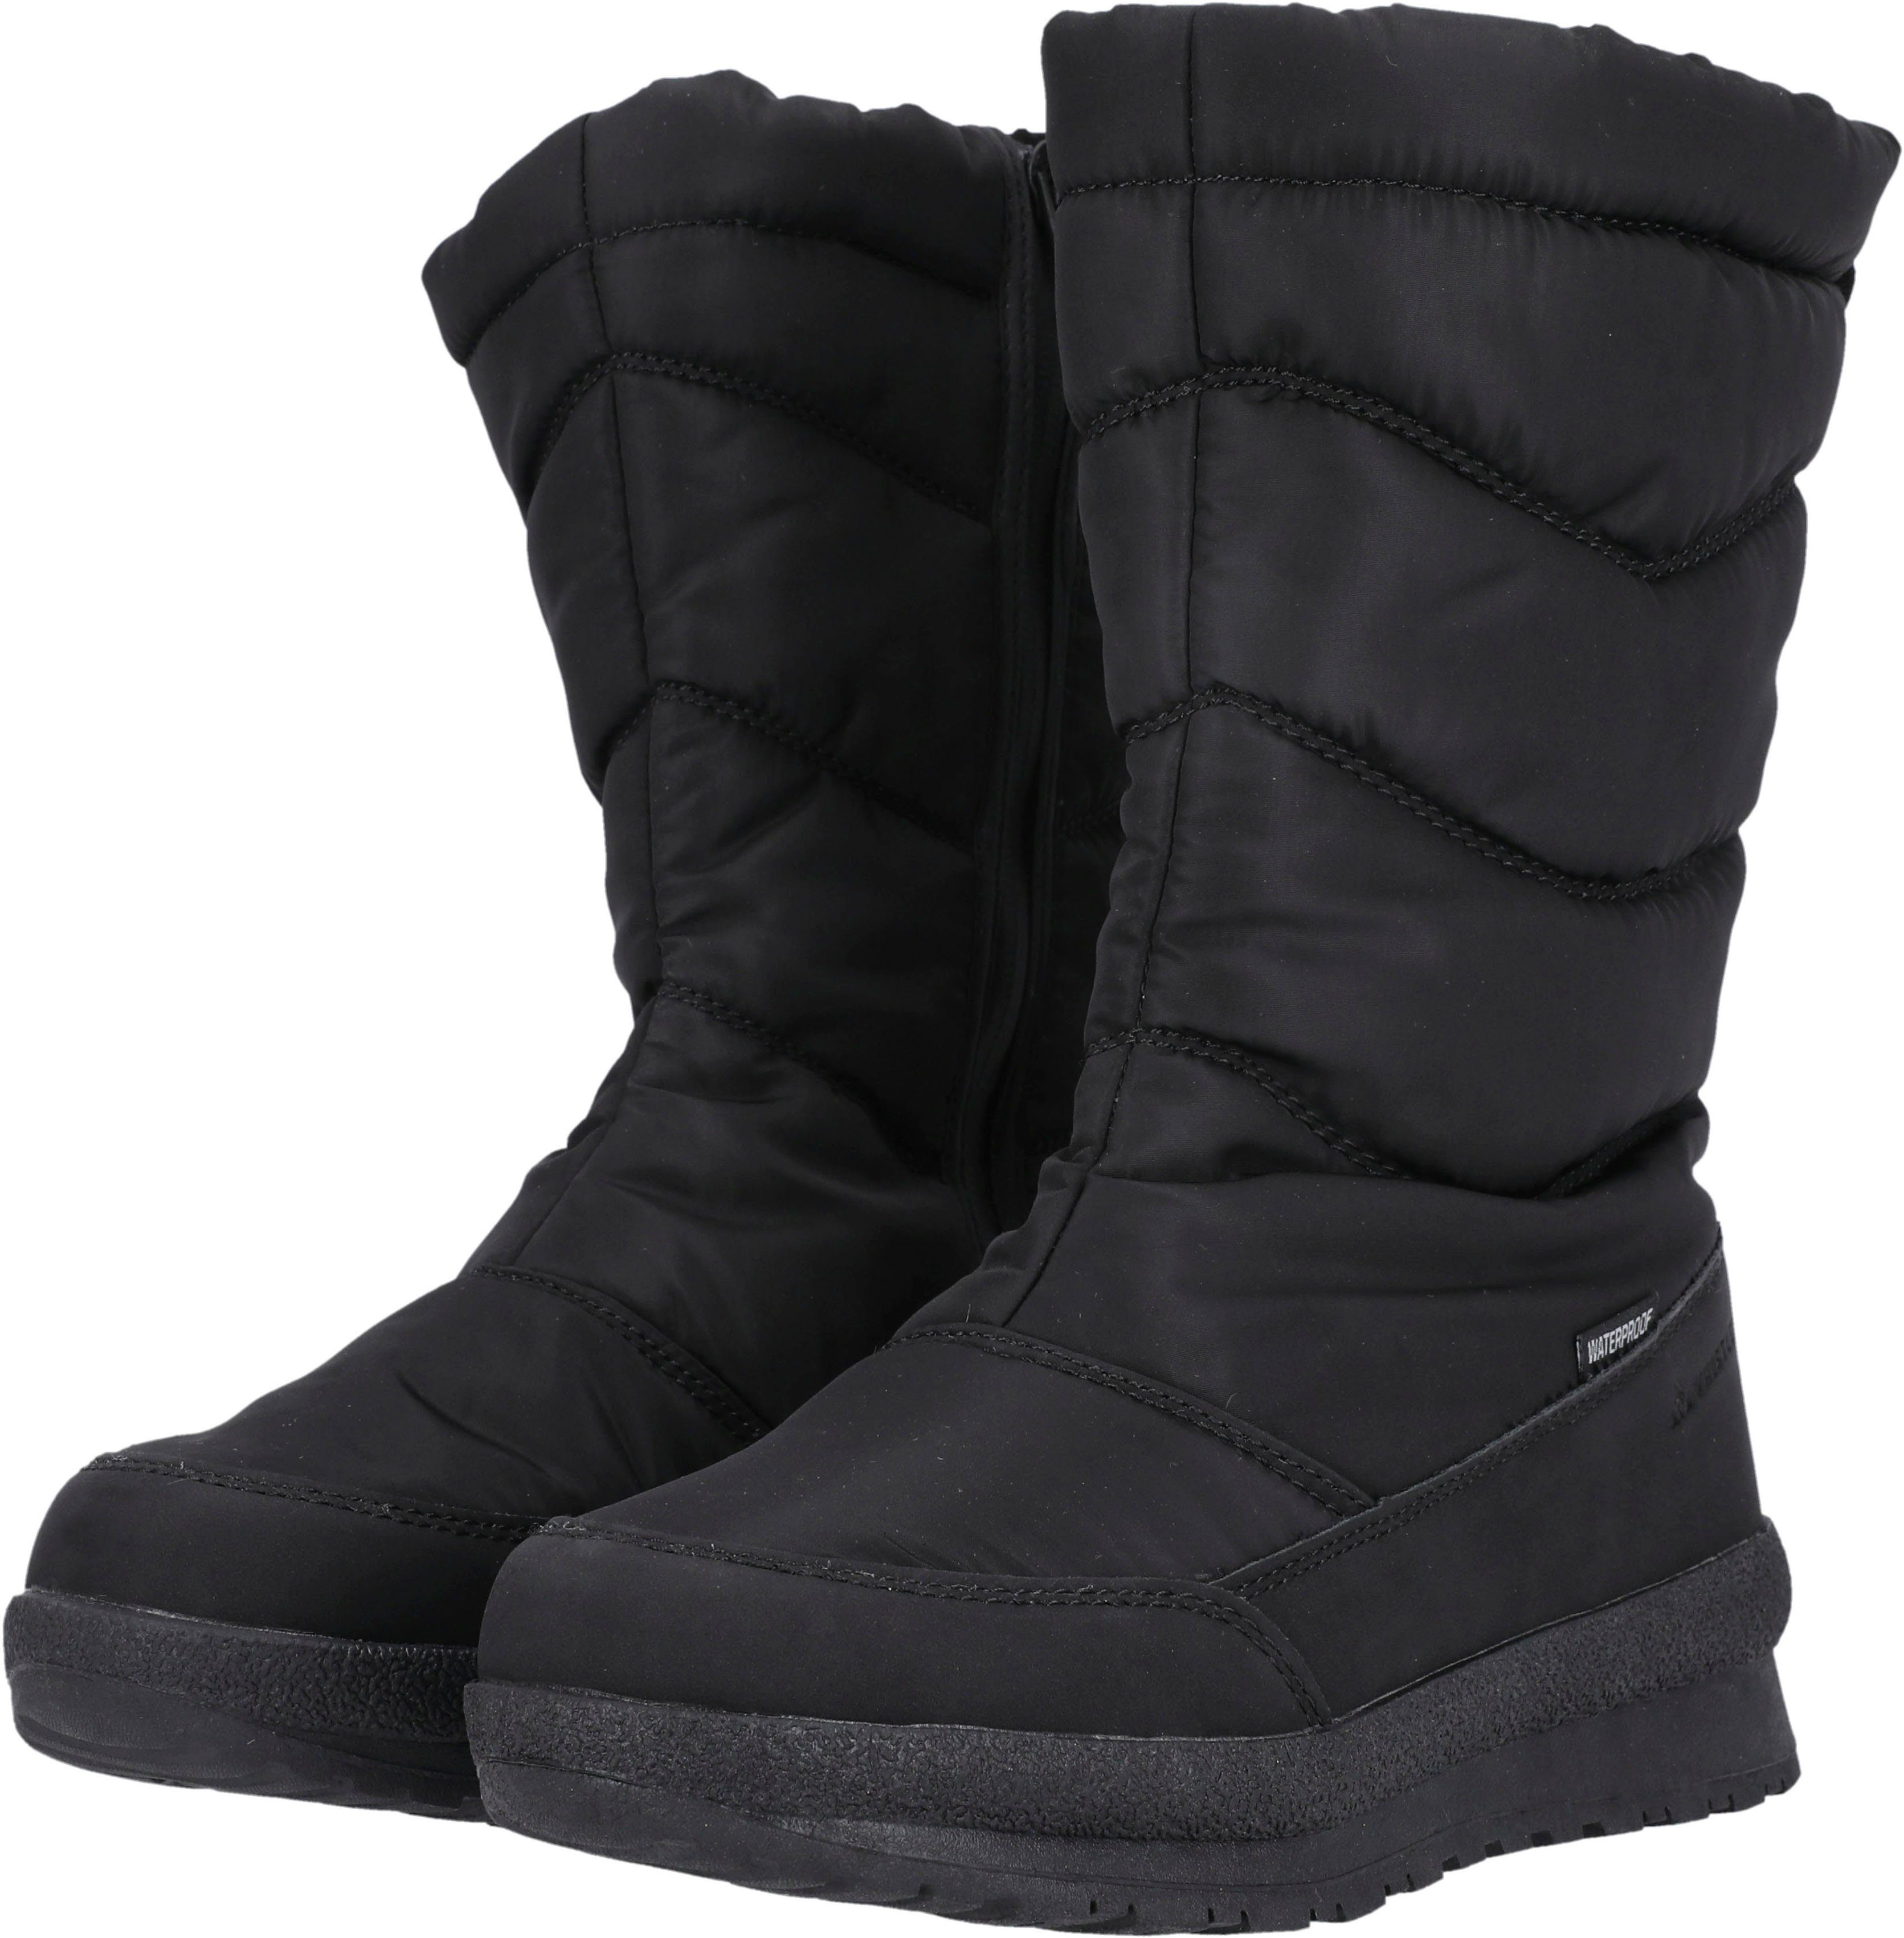 WHISTLER WHW234153 Winterboots Warmfutter